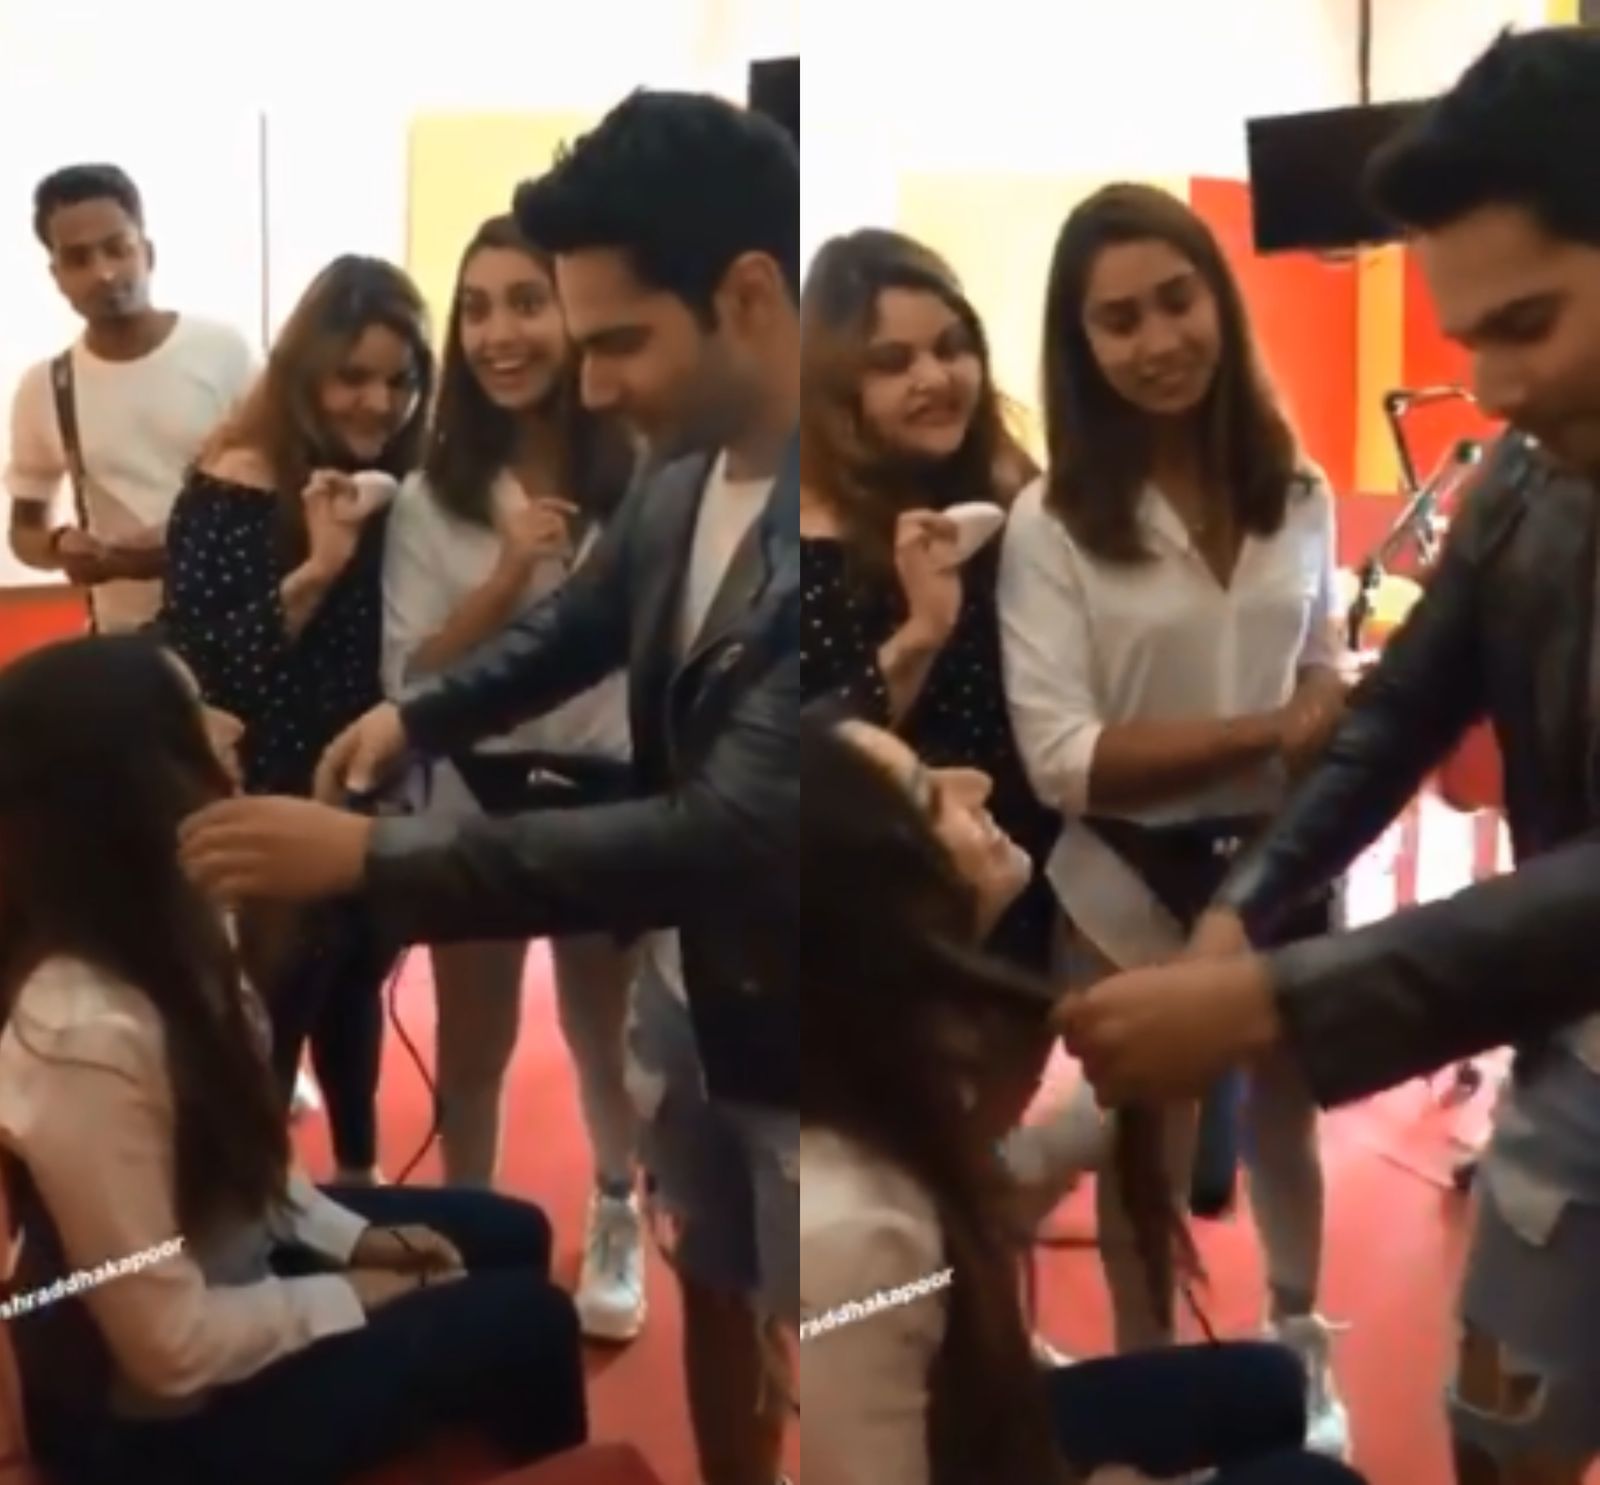 Watch: Varun Dhawan Turns Hairstylist For Street Dancer 3D Co-Star Shraddha Kapoor In This Adorable Video